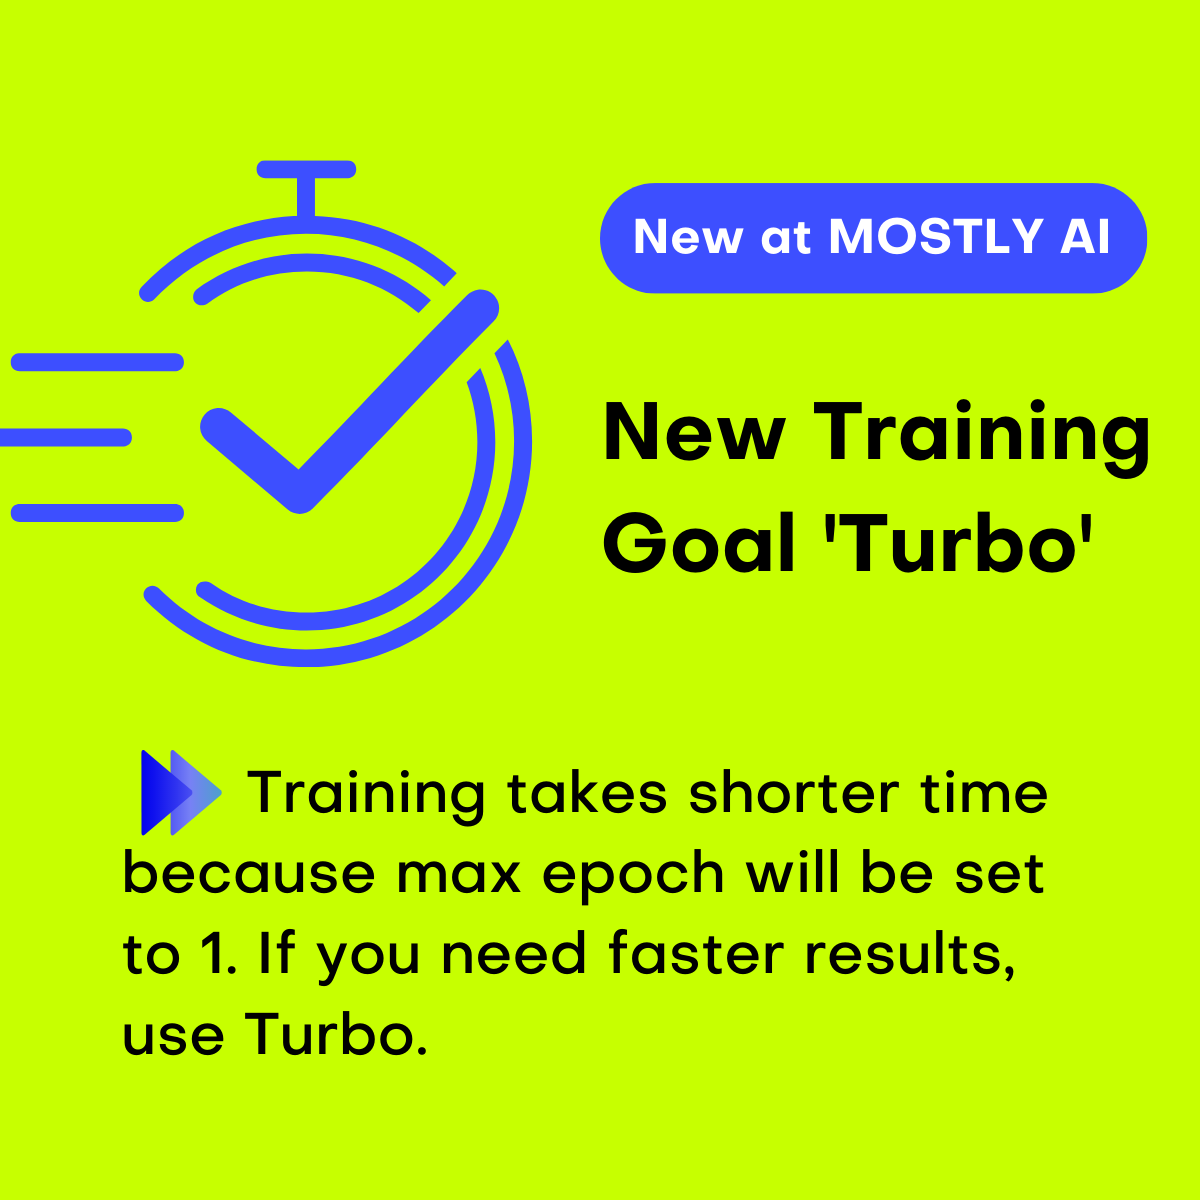 Introducing 'Turbo': Say goodbye to long training times! With the Turbo training goal, we've set the maximum epoch to 1, allowing you to achieve faster results without compromising quality. 👉 hubs.ly/Q01TtVS90 Try it for free now 👉 hubs.ly/Q01TtM3j0